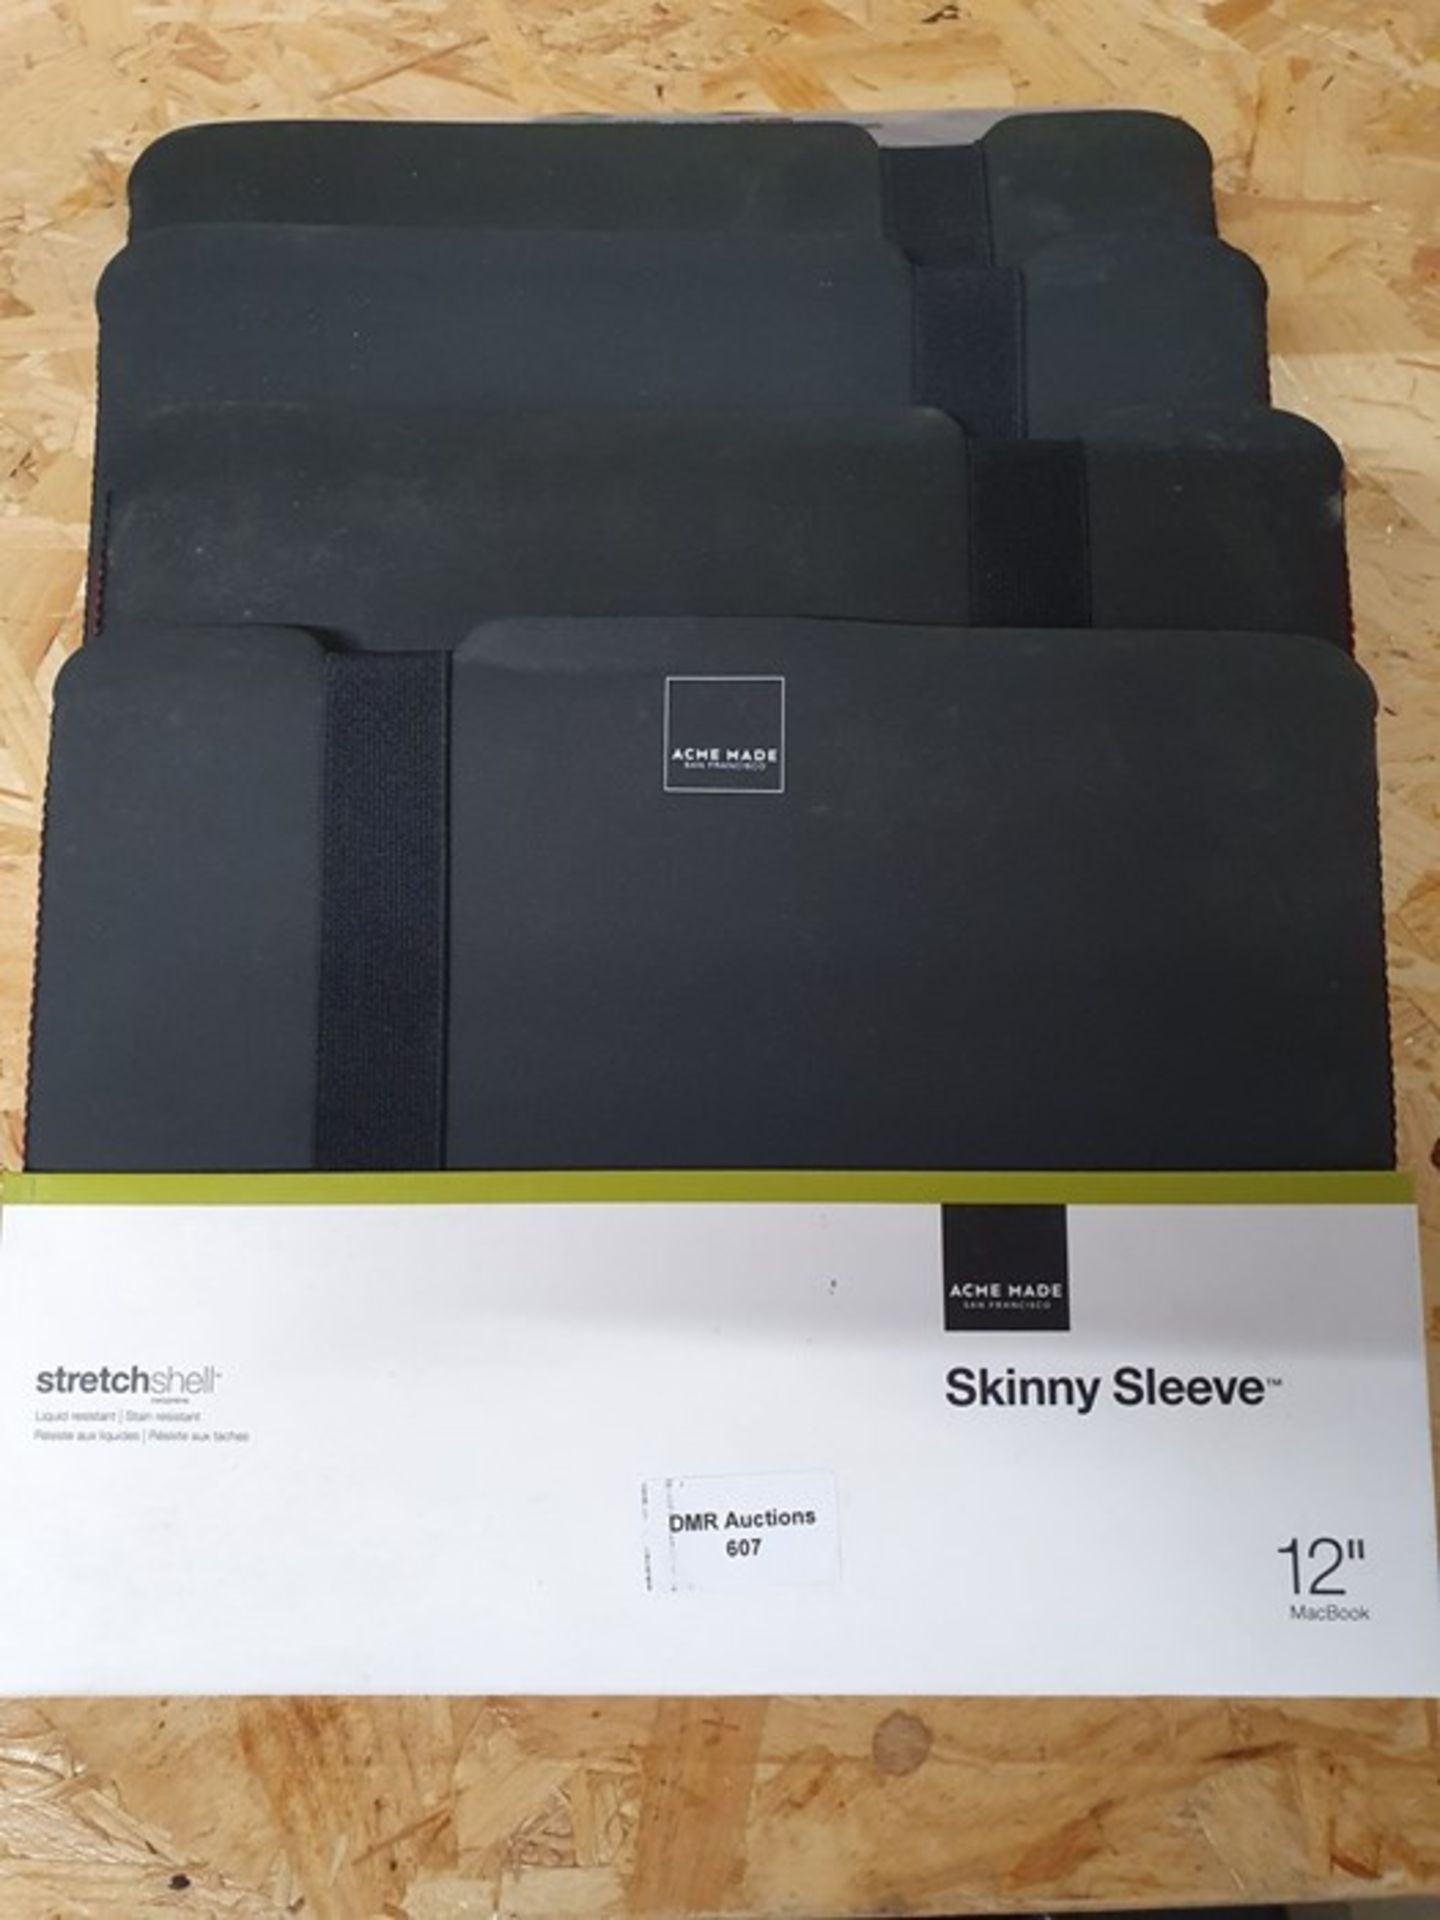 ONE LOT TO CONTAIN FIVE (X5) 12" MACBOOK 'ACME MADE' BLACK SKINNY SLEEVES. ALL AS NEW IN ORIGINAL